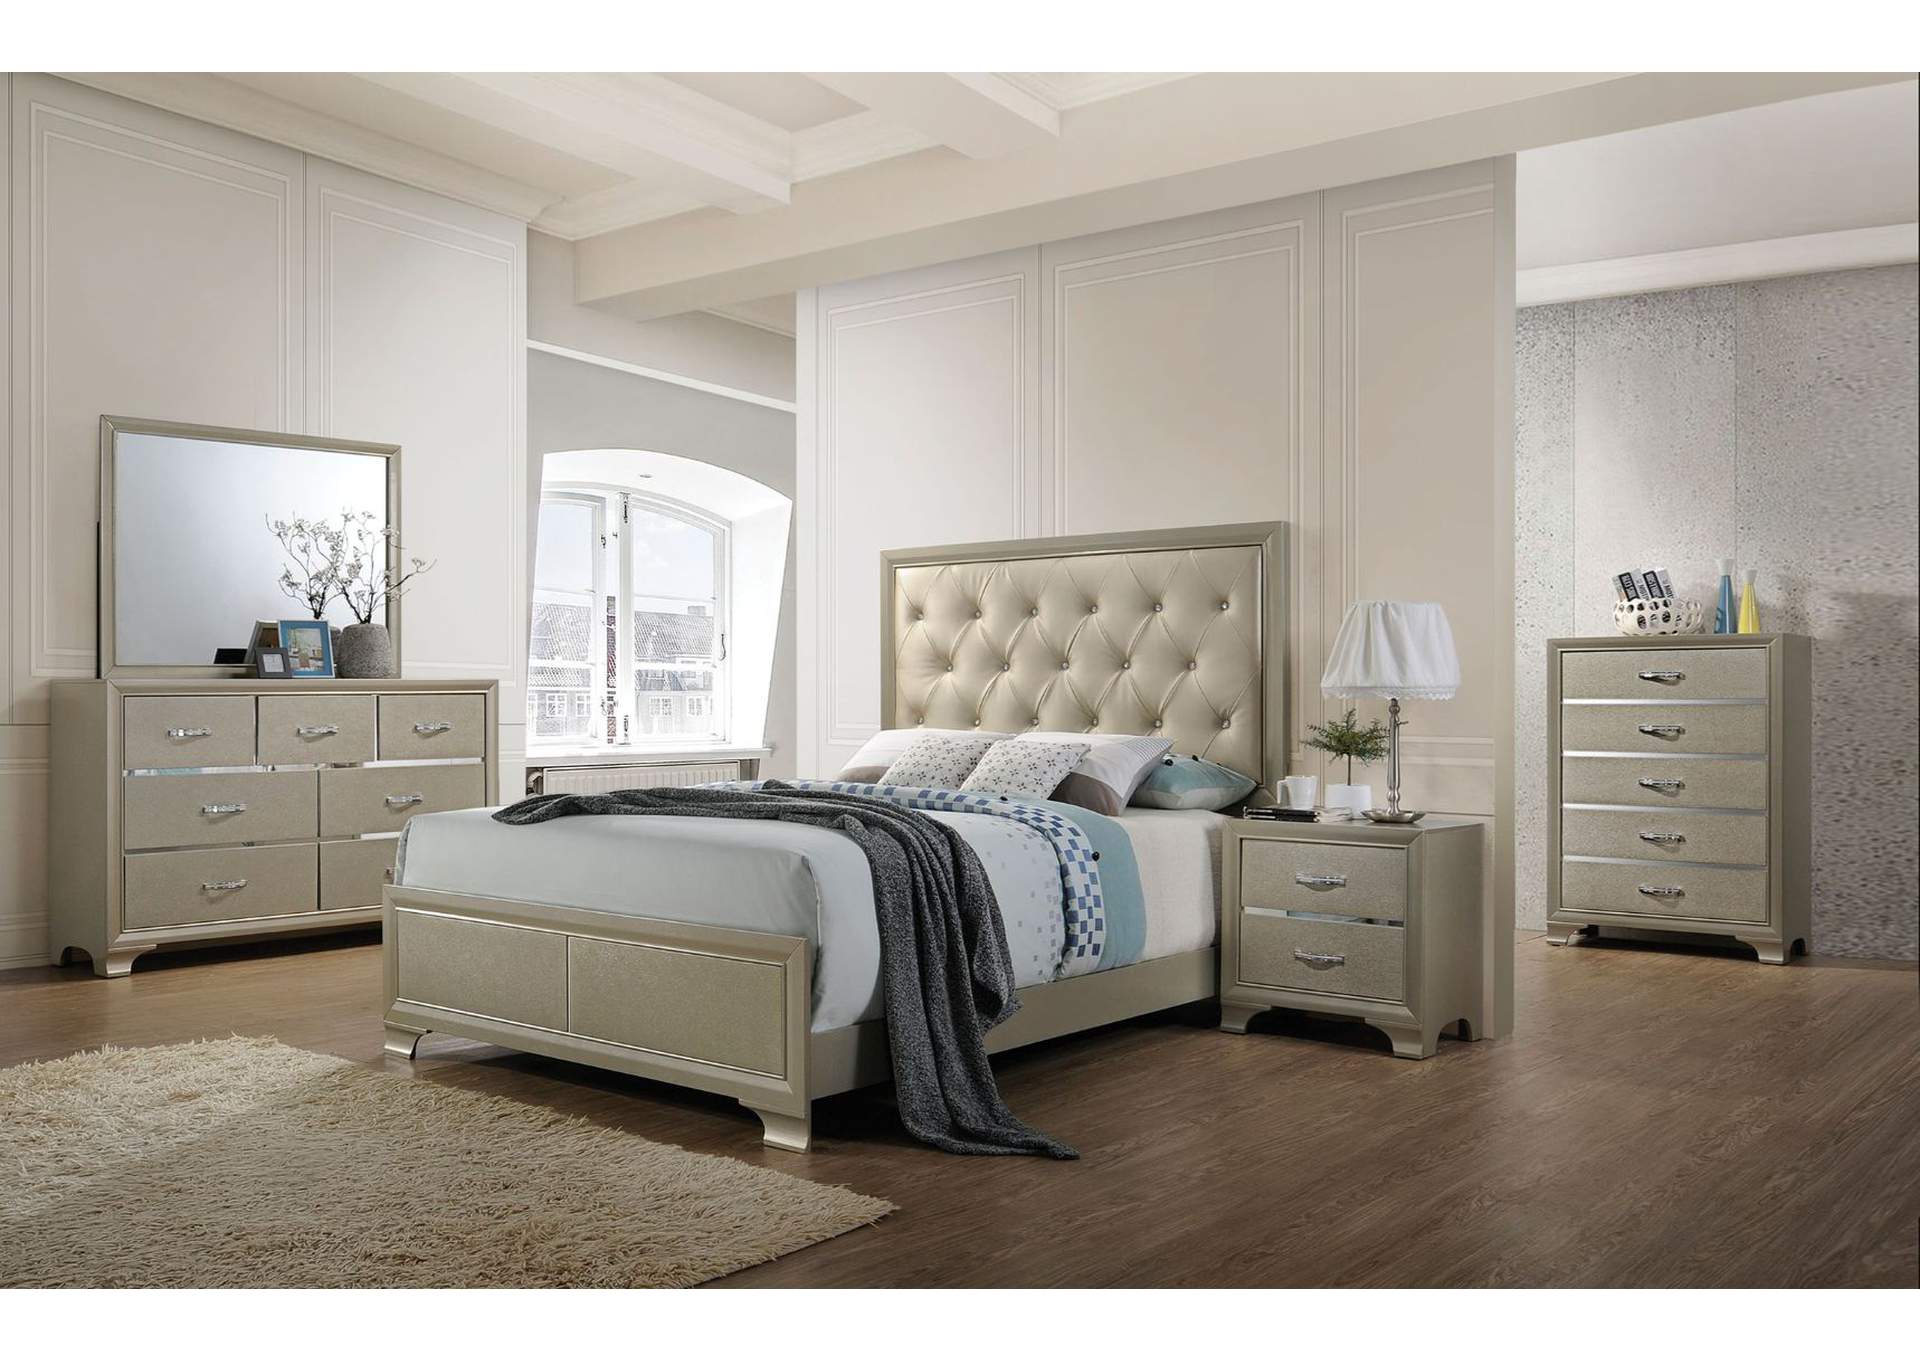 Carine PU & Champagne Queen Bed,Acme